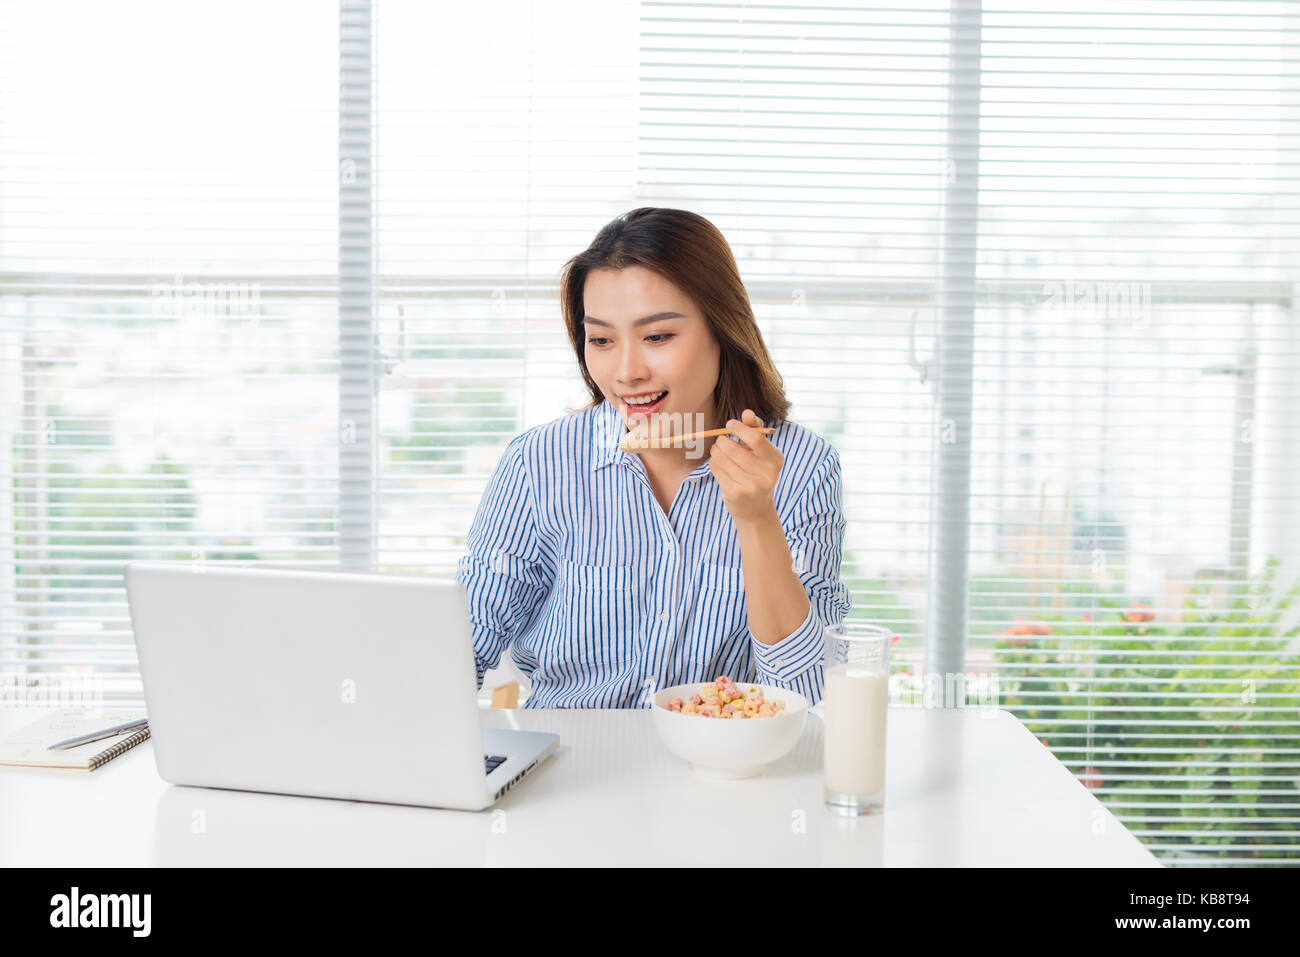 Female business executive eating lunch  at her workplace Stock Photo